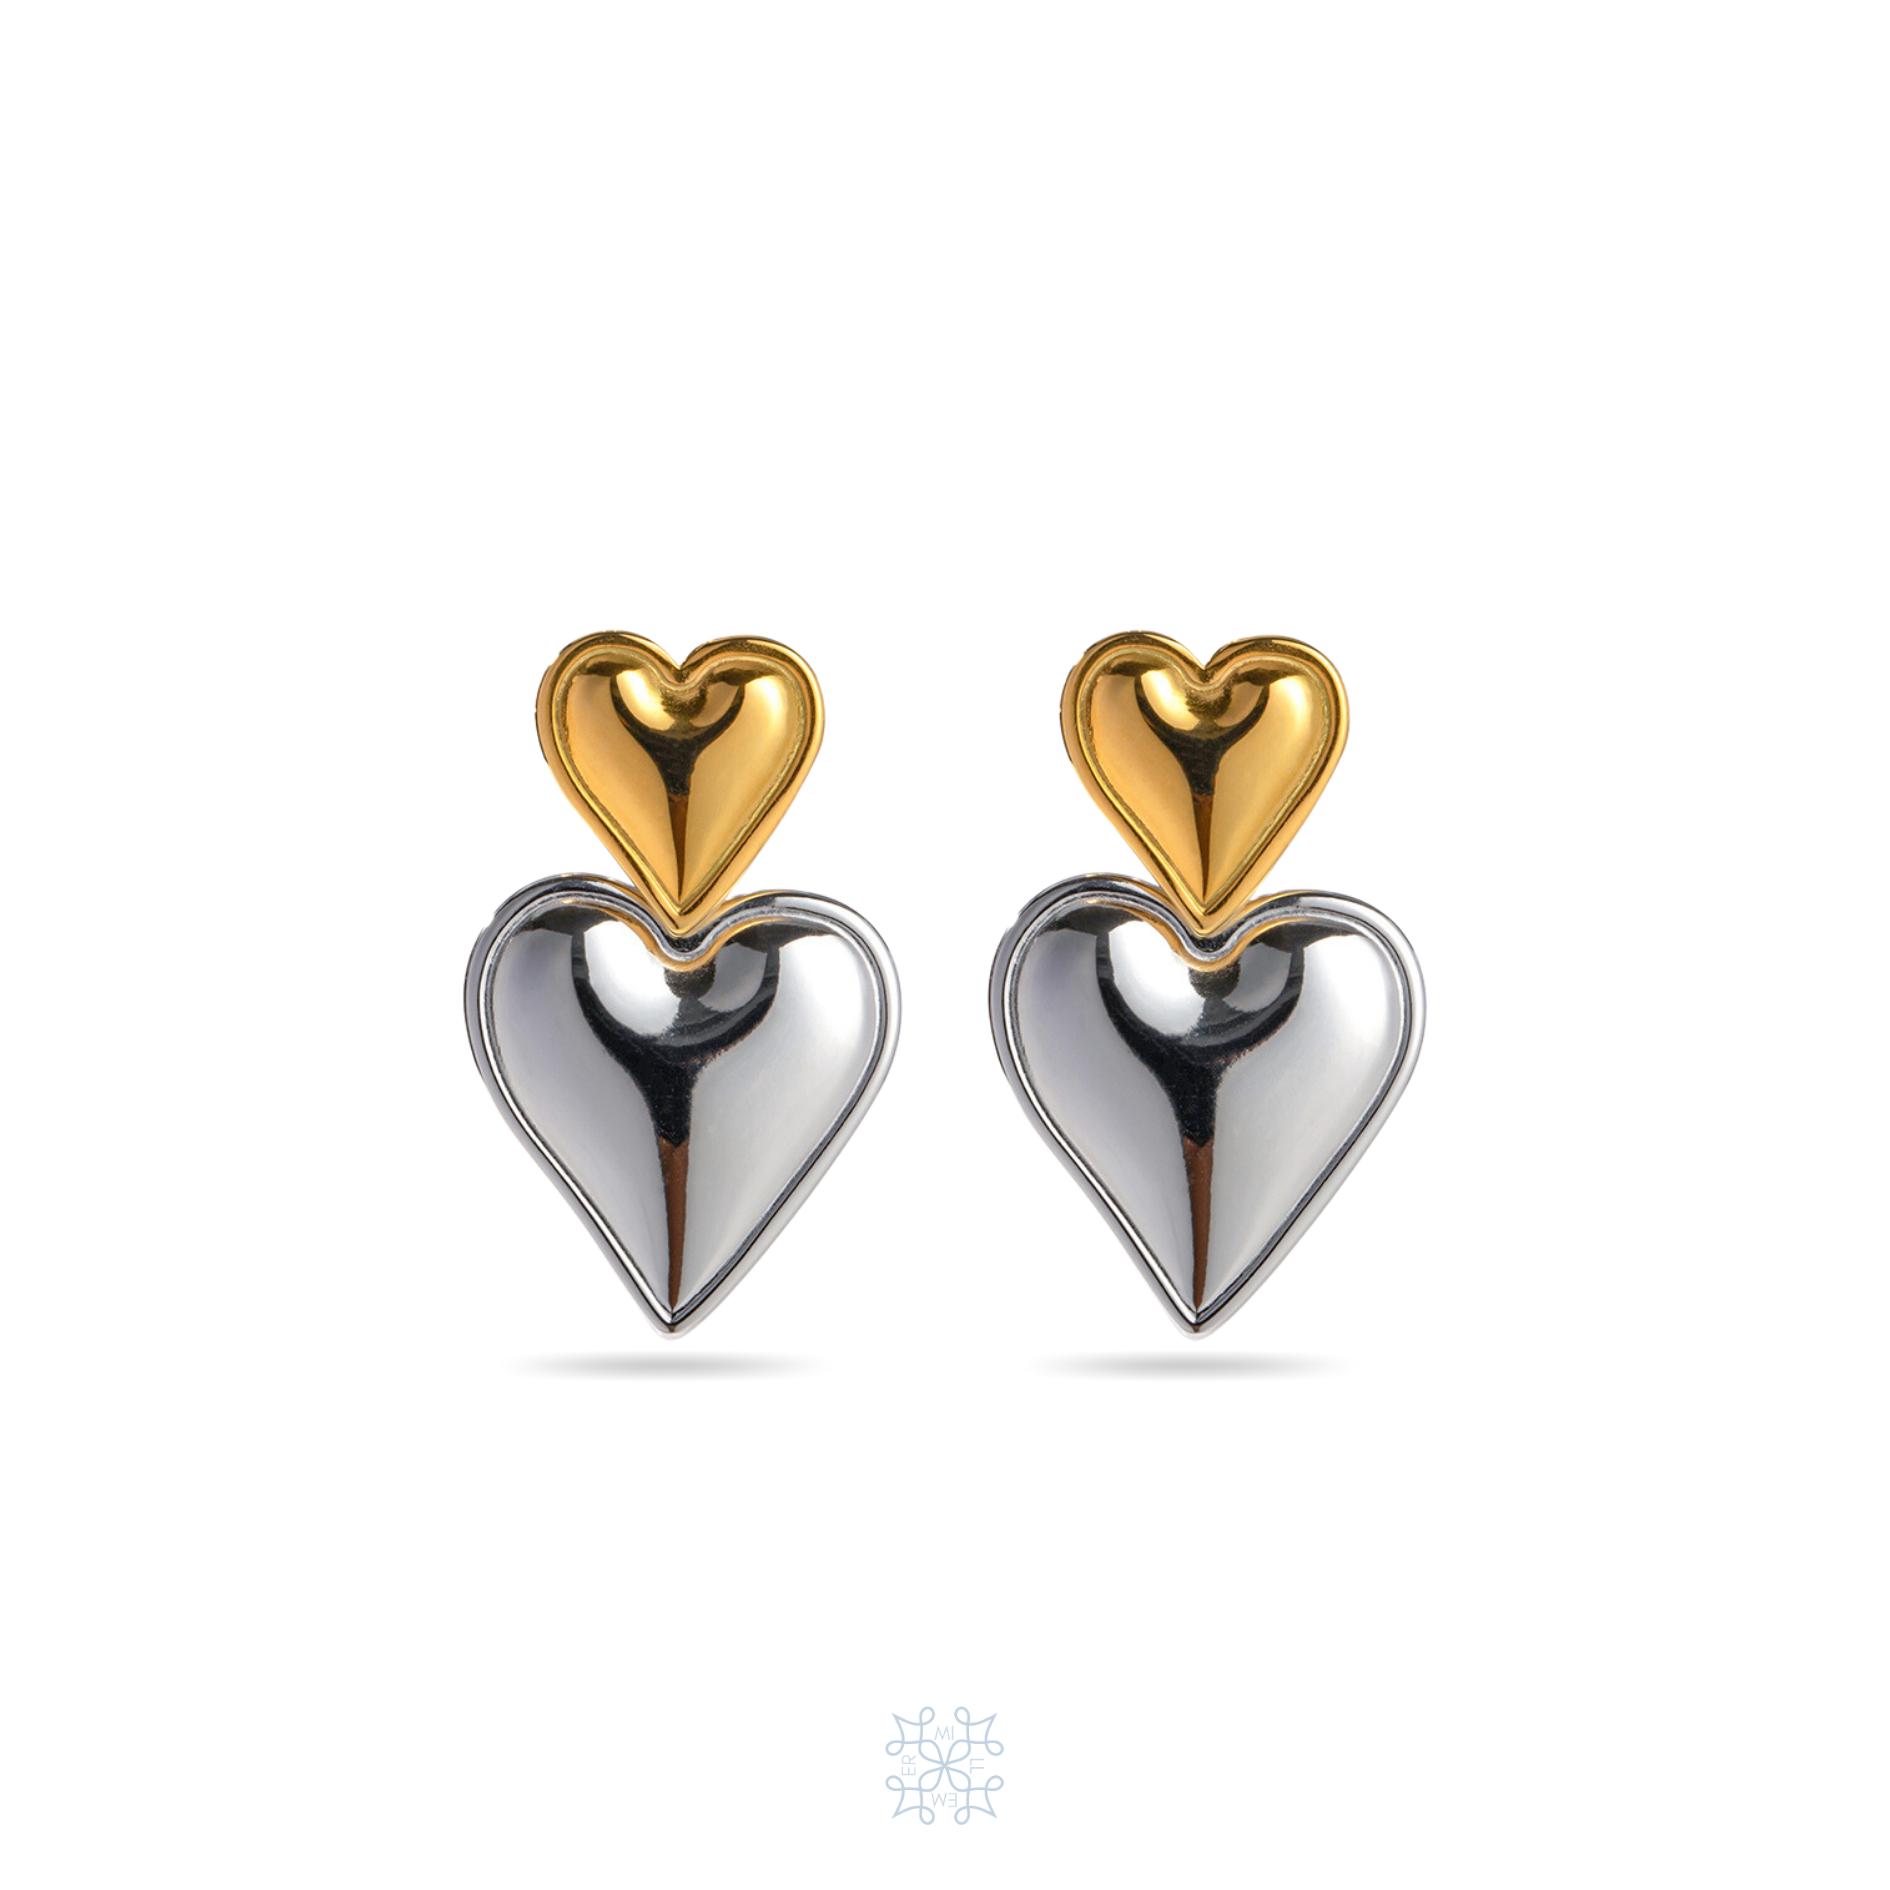 Double Heart Earrings in Silver Heart in the bottom and smaller gold heart in the top.